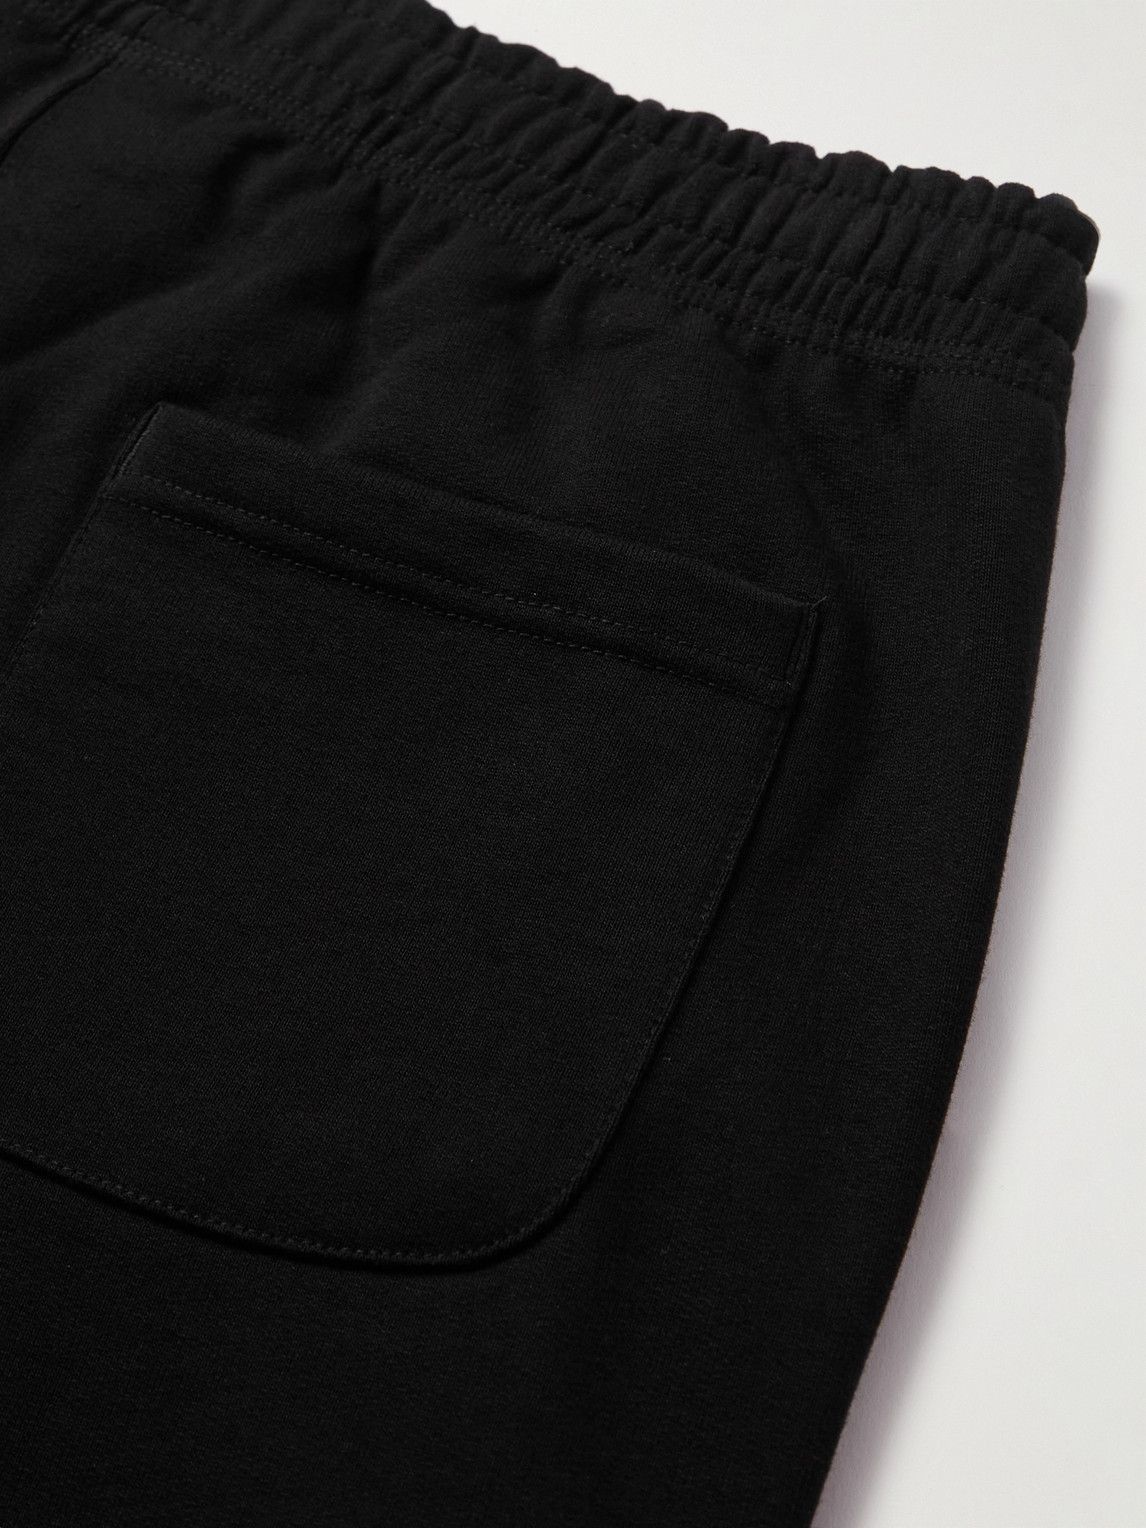 Stussy - Tapered Logo-Embroidered Cotton-Jersey Sweatpants - Black Stussy